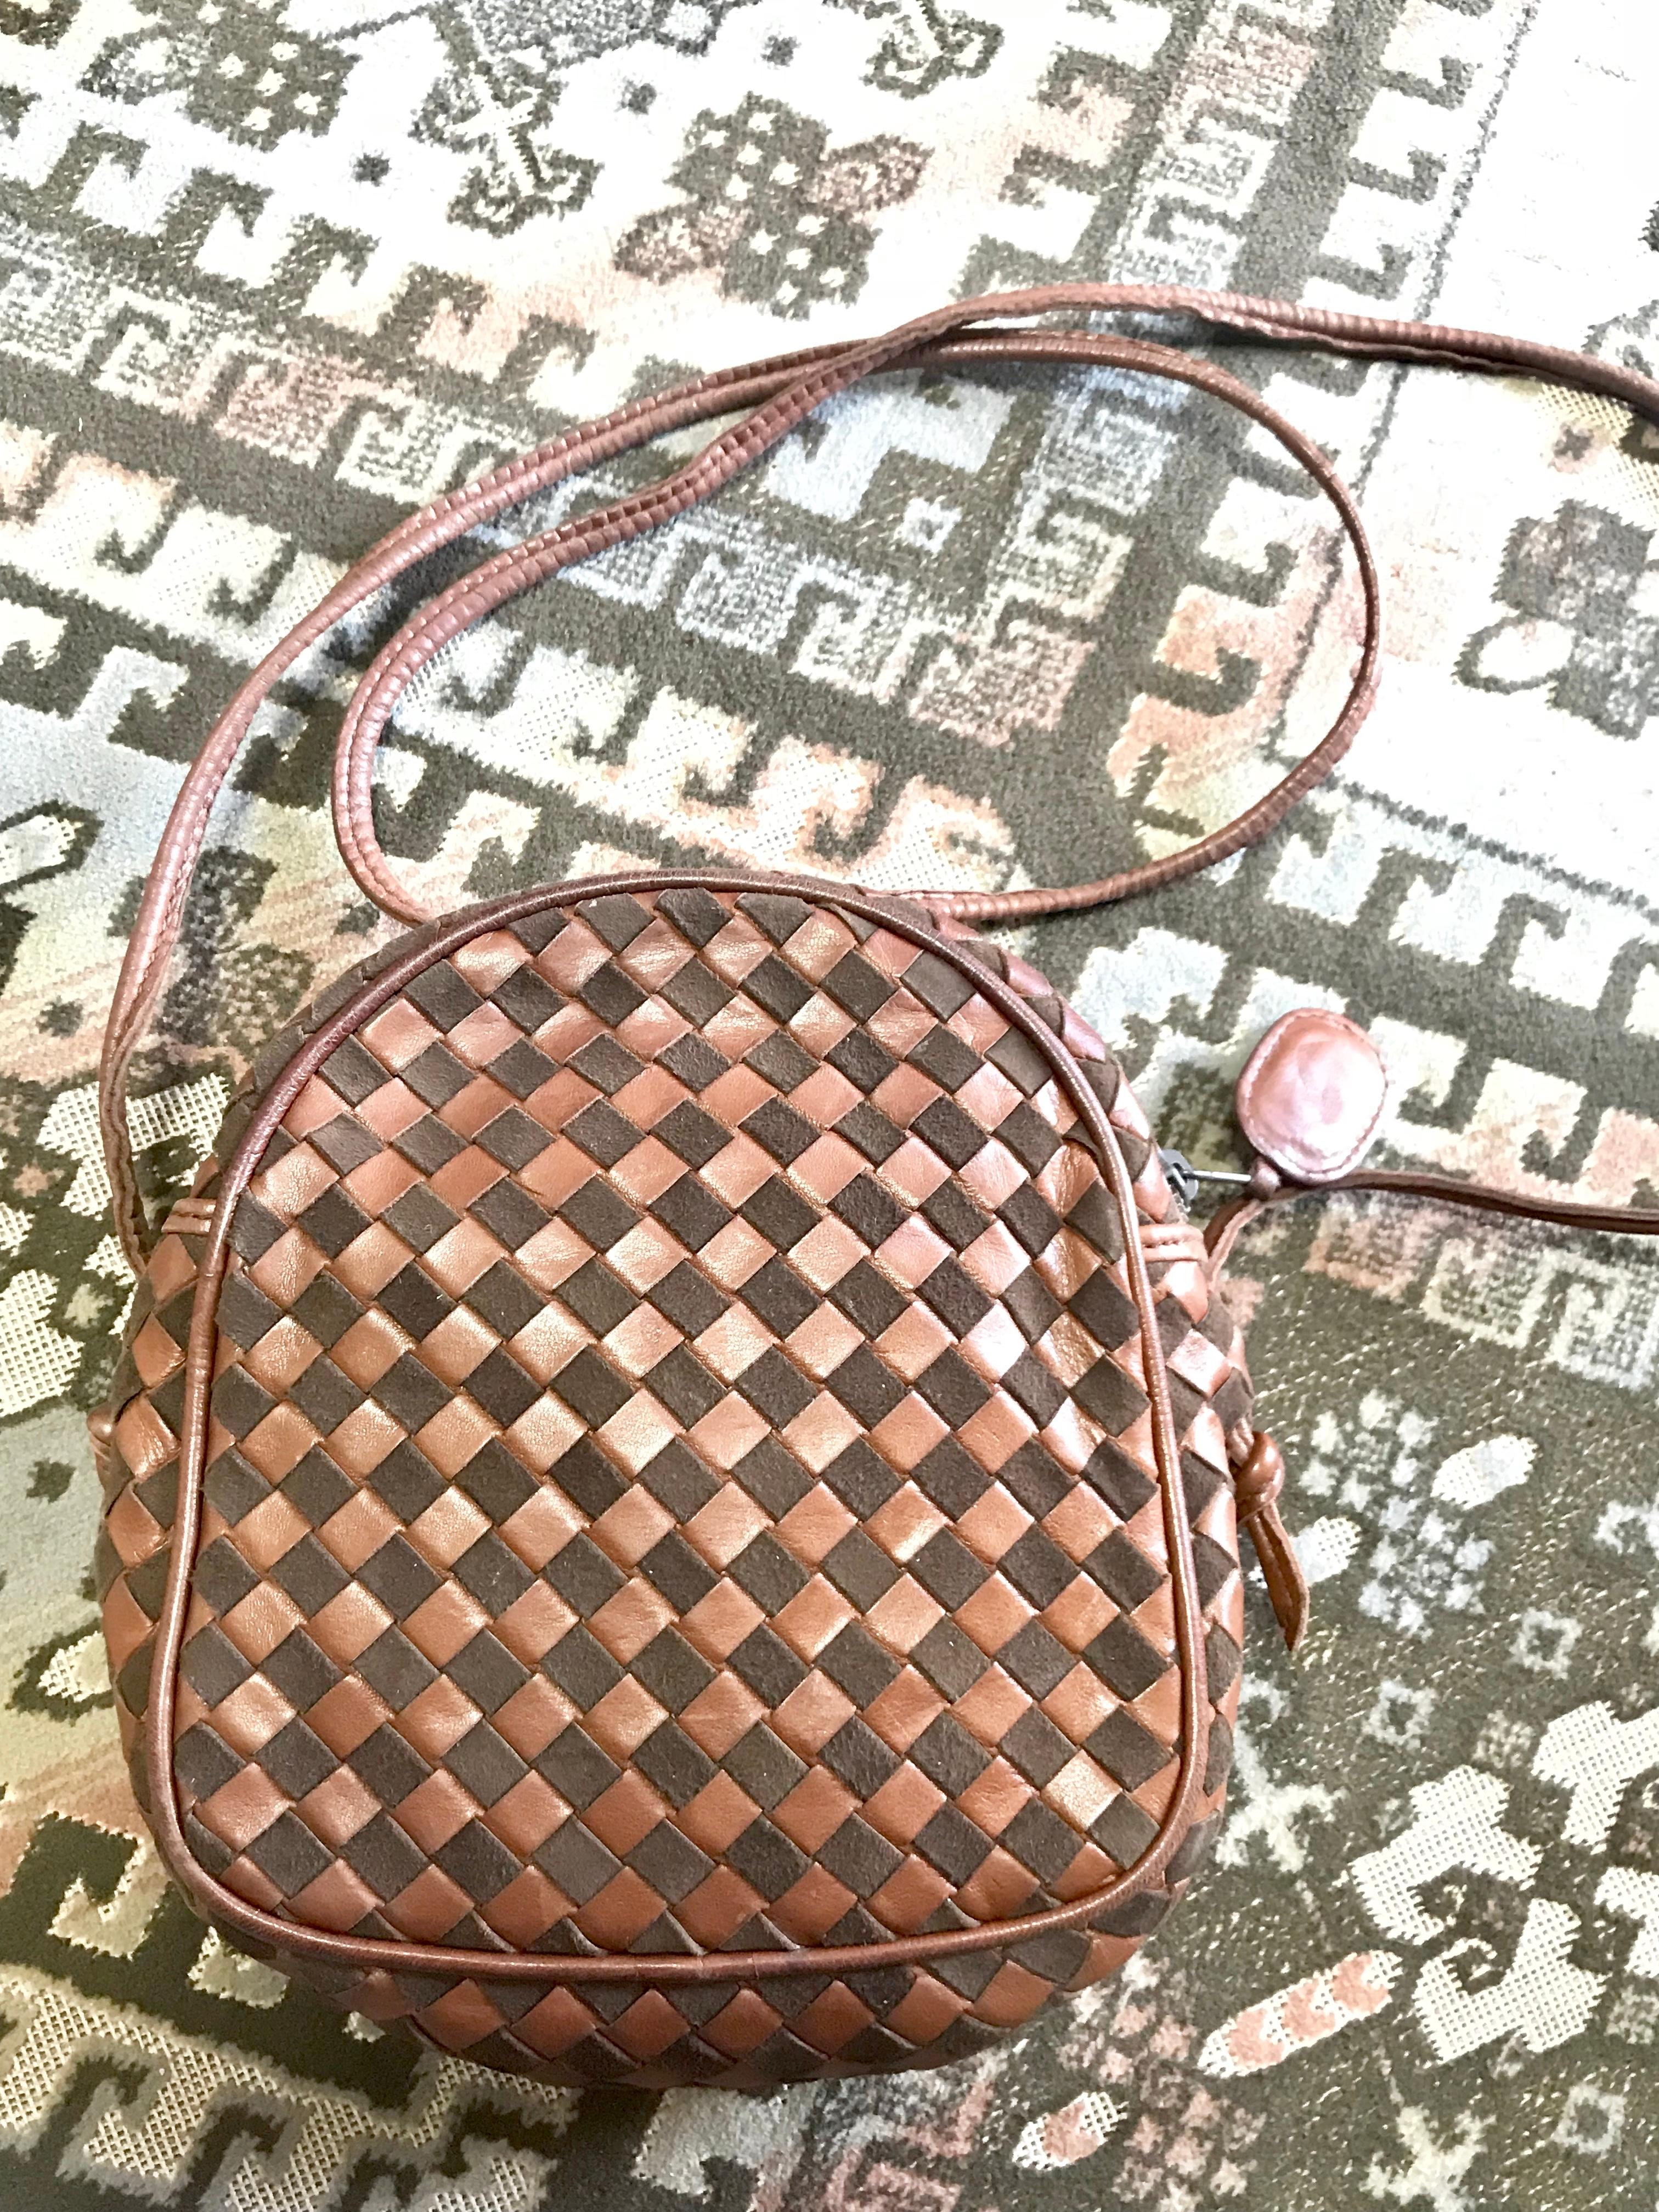 1980s. Vintage Valentino Garavani brown intrecciato mini pouch style shoulder bag with V logo embossed pull. Classic purse.

Introducing another vintage purse in intrecciato style mini shoulder bag from Valentino Garavani in the 90's.

Love its cute